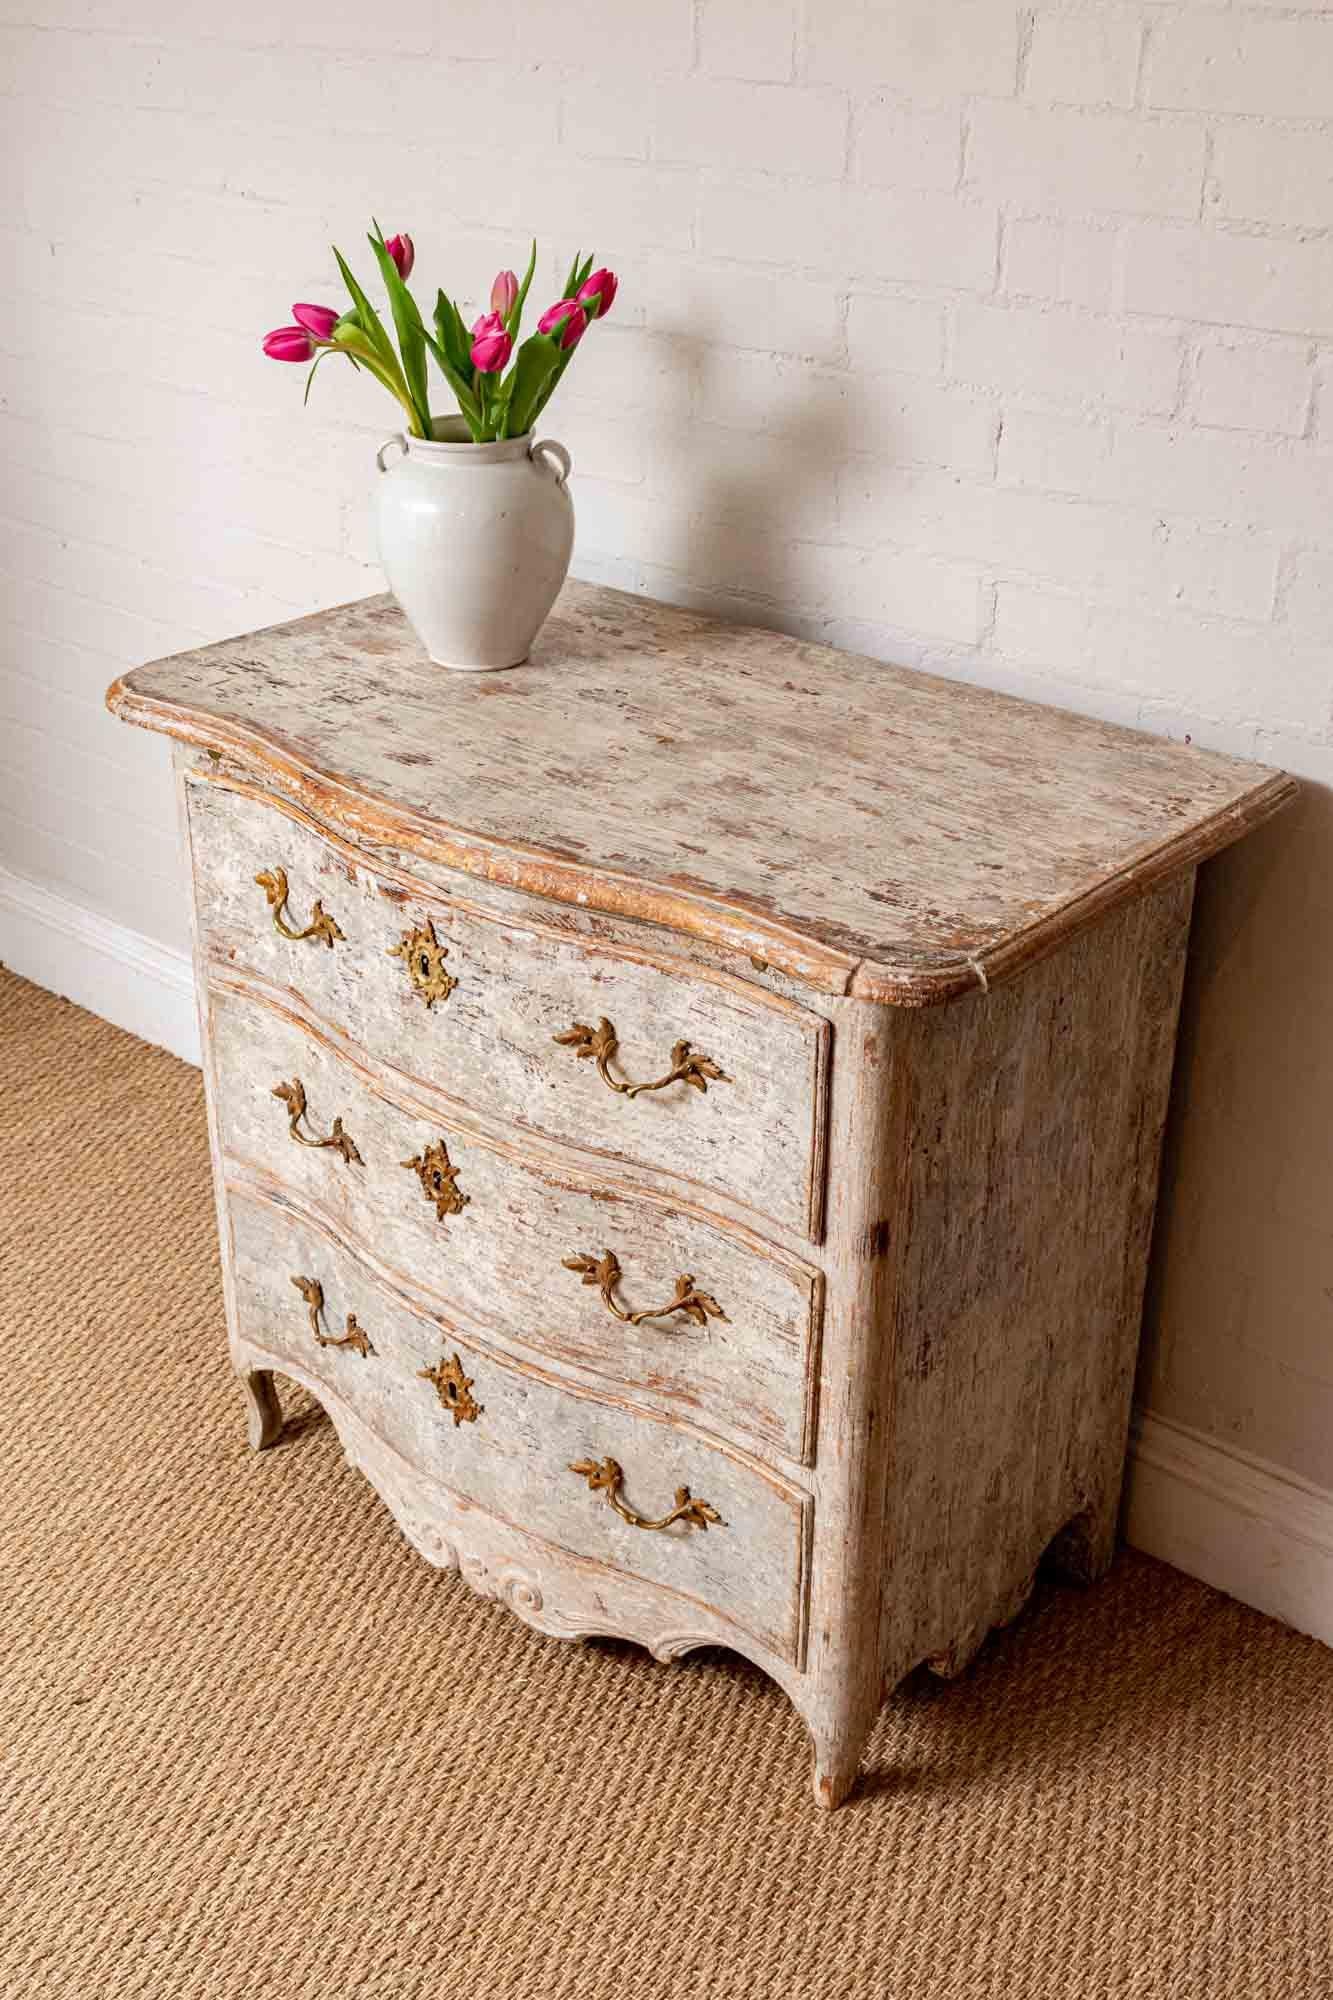 Late 18th century hand painted commode or chest of drawers. This is a substantially sturdy and well-made piece for such a small commode. It features a sliding shelf underneath the top, three curved-drawers with spring-locks and brass ornate